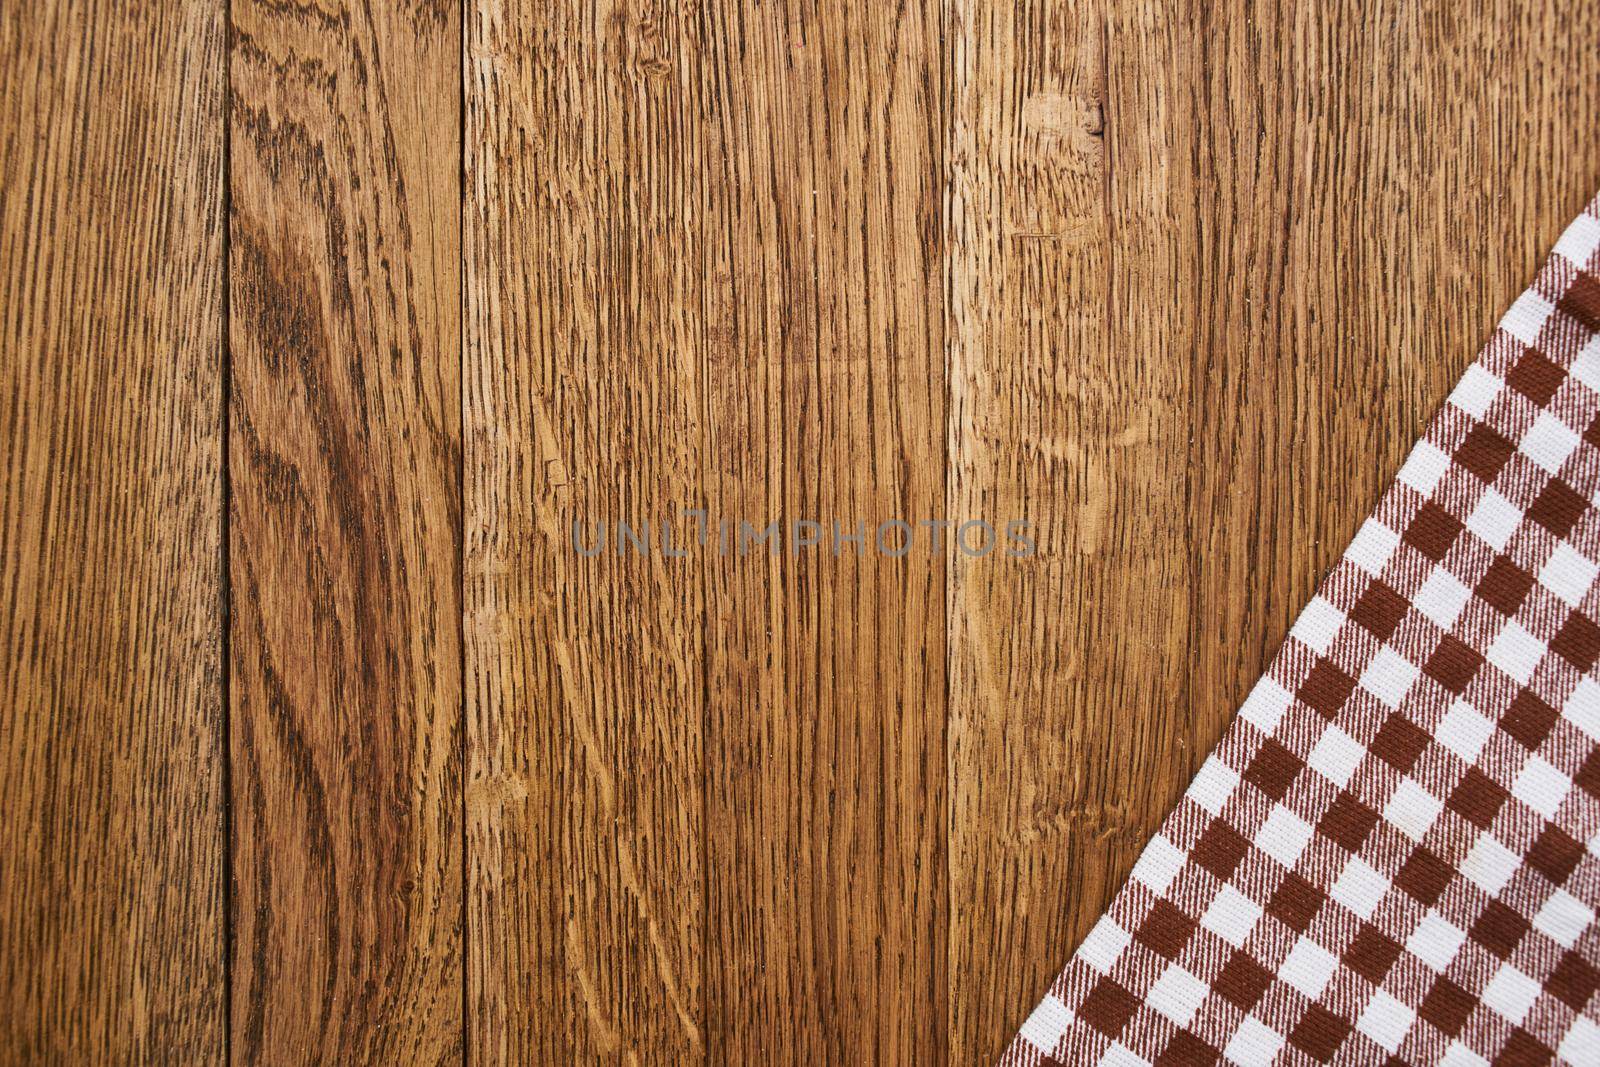 wooden table plaid tablecloth decoration kitchen top view. High quality photo